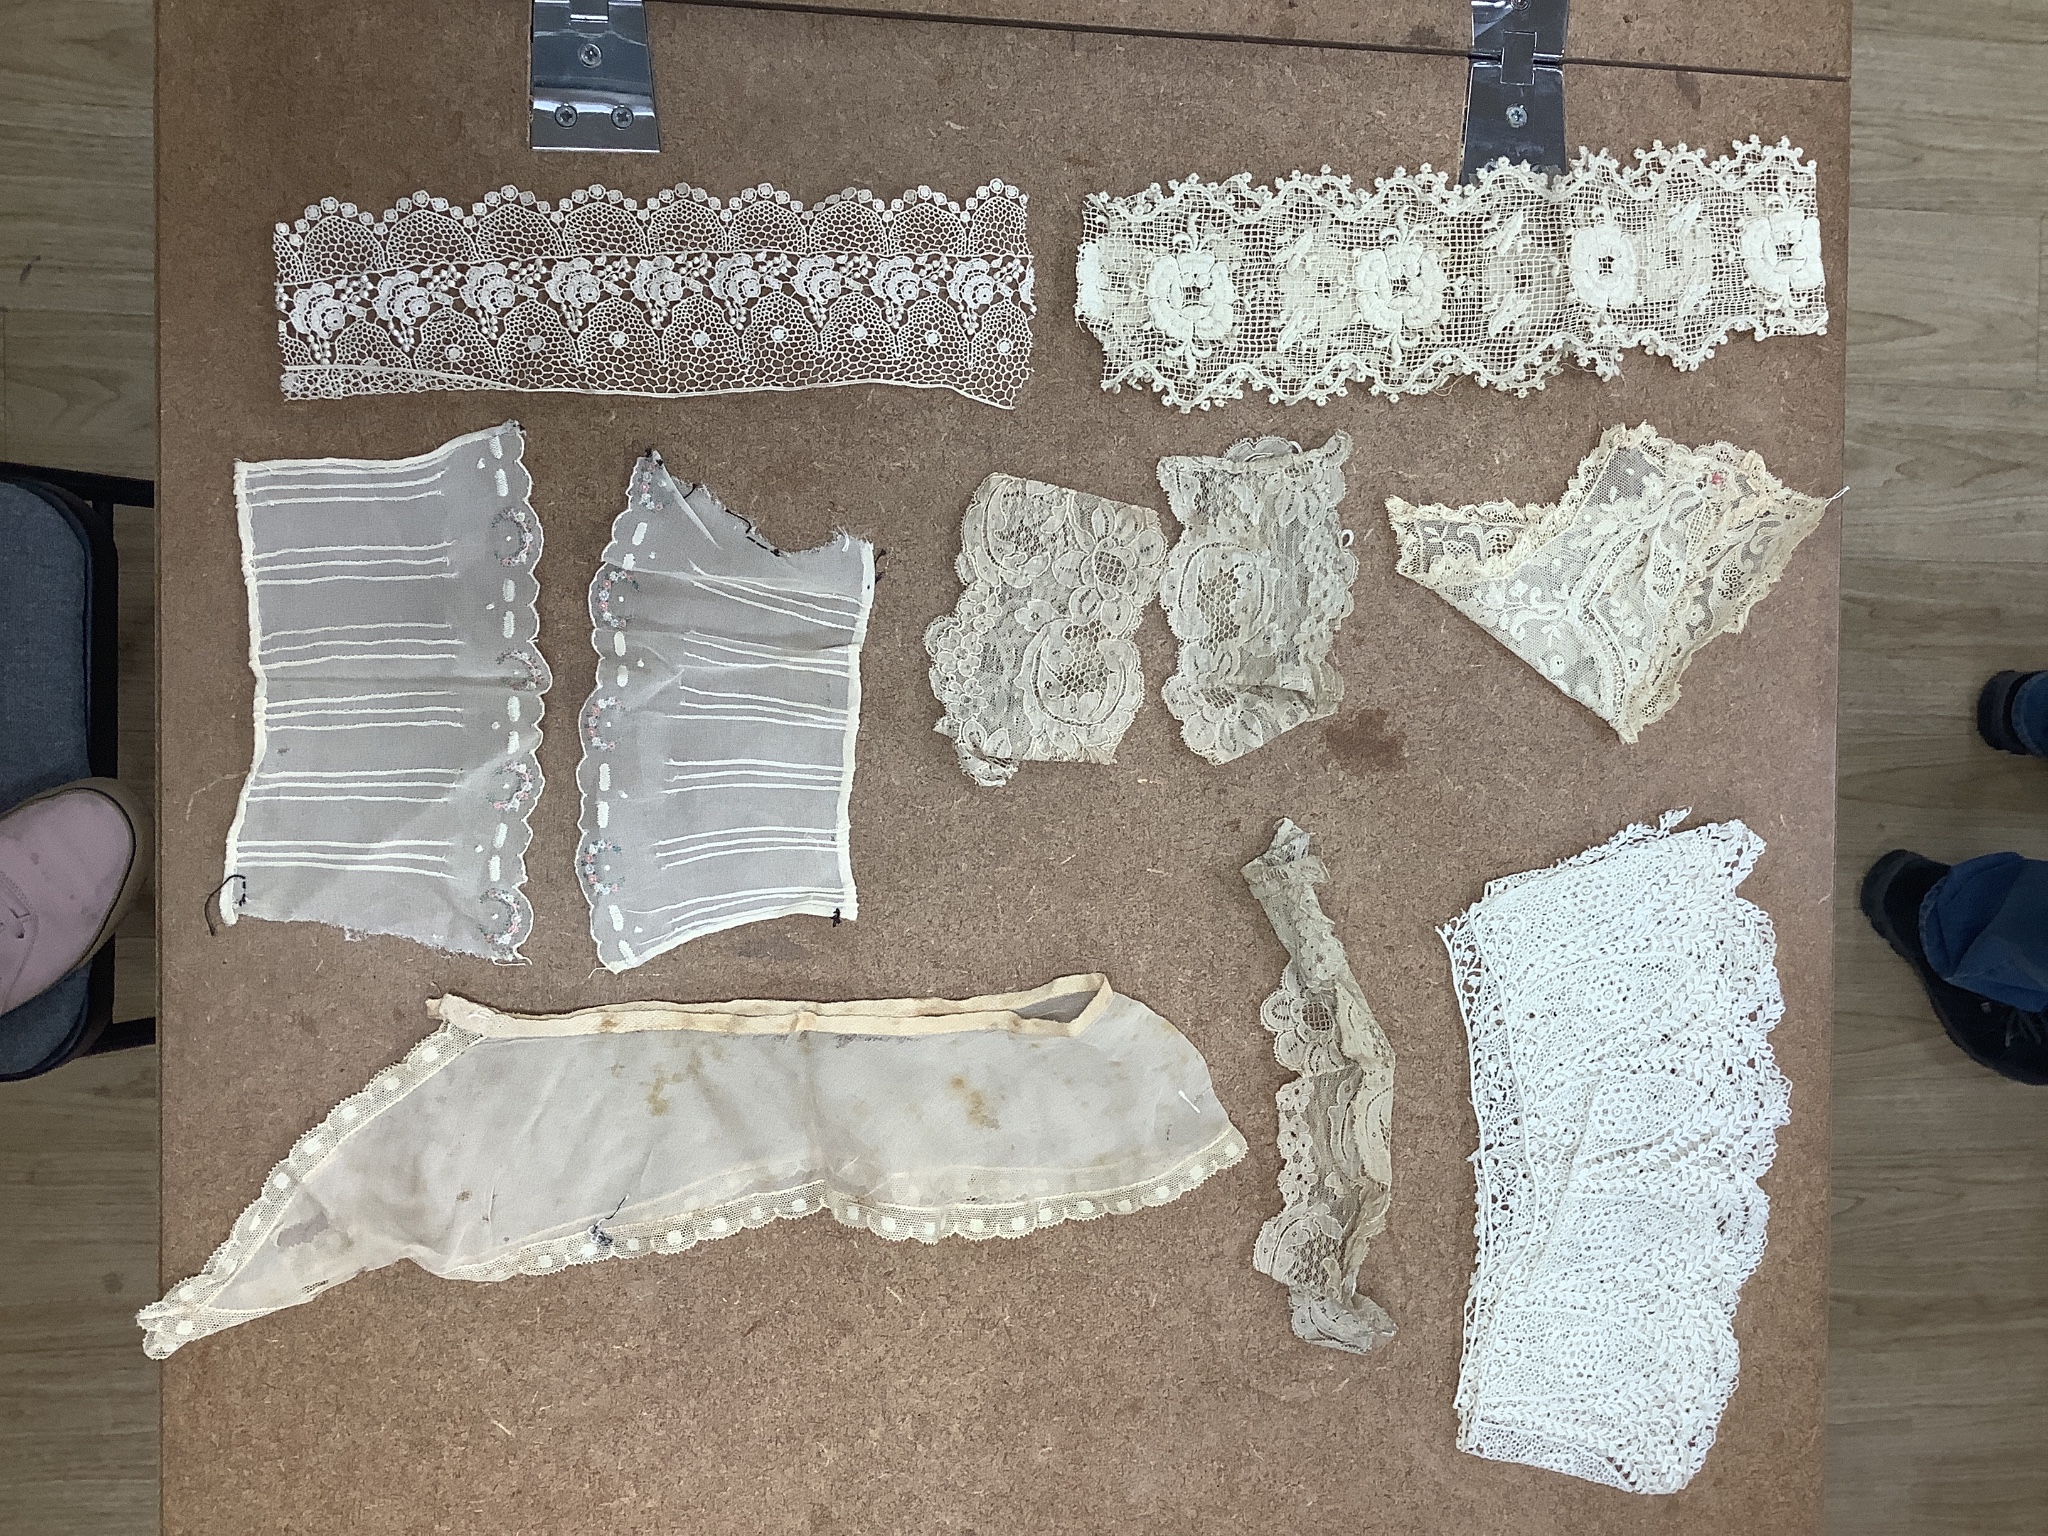 A collection of lace collars and trimmings